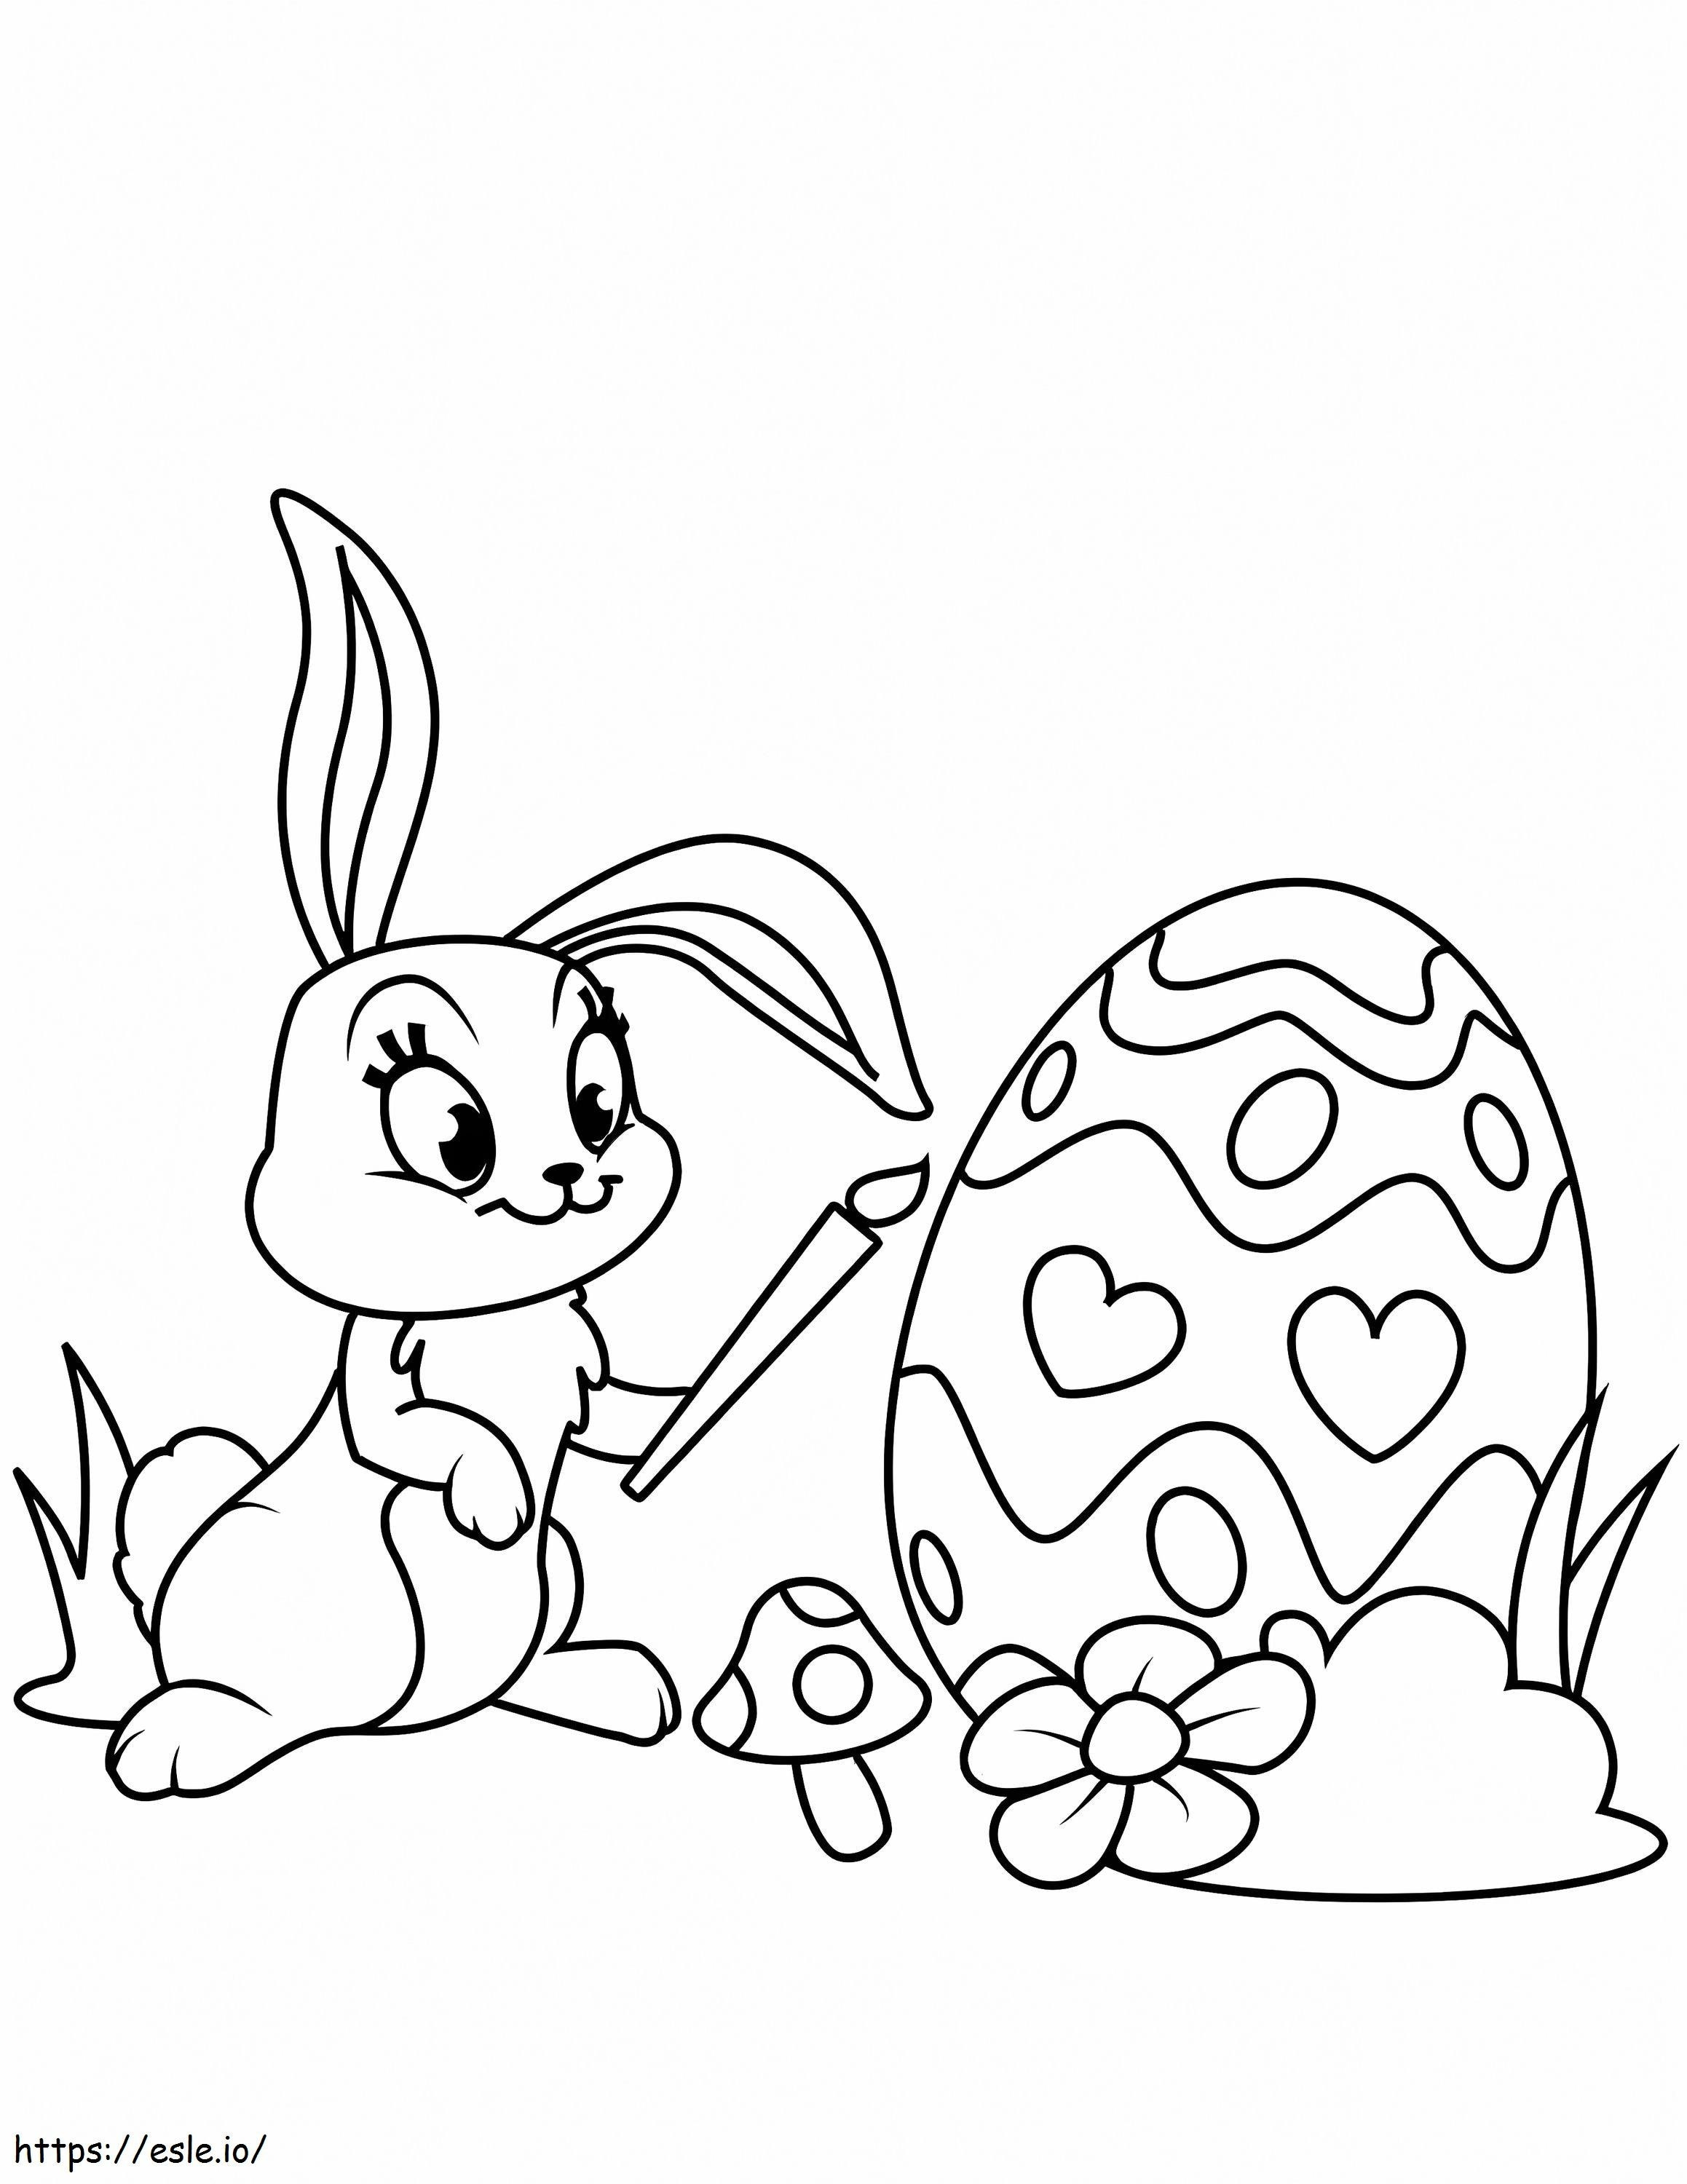 Easter Rabbit Drawing Egg coloring page